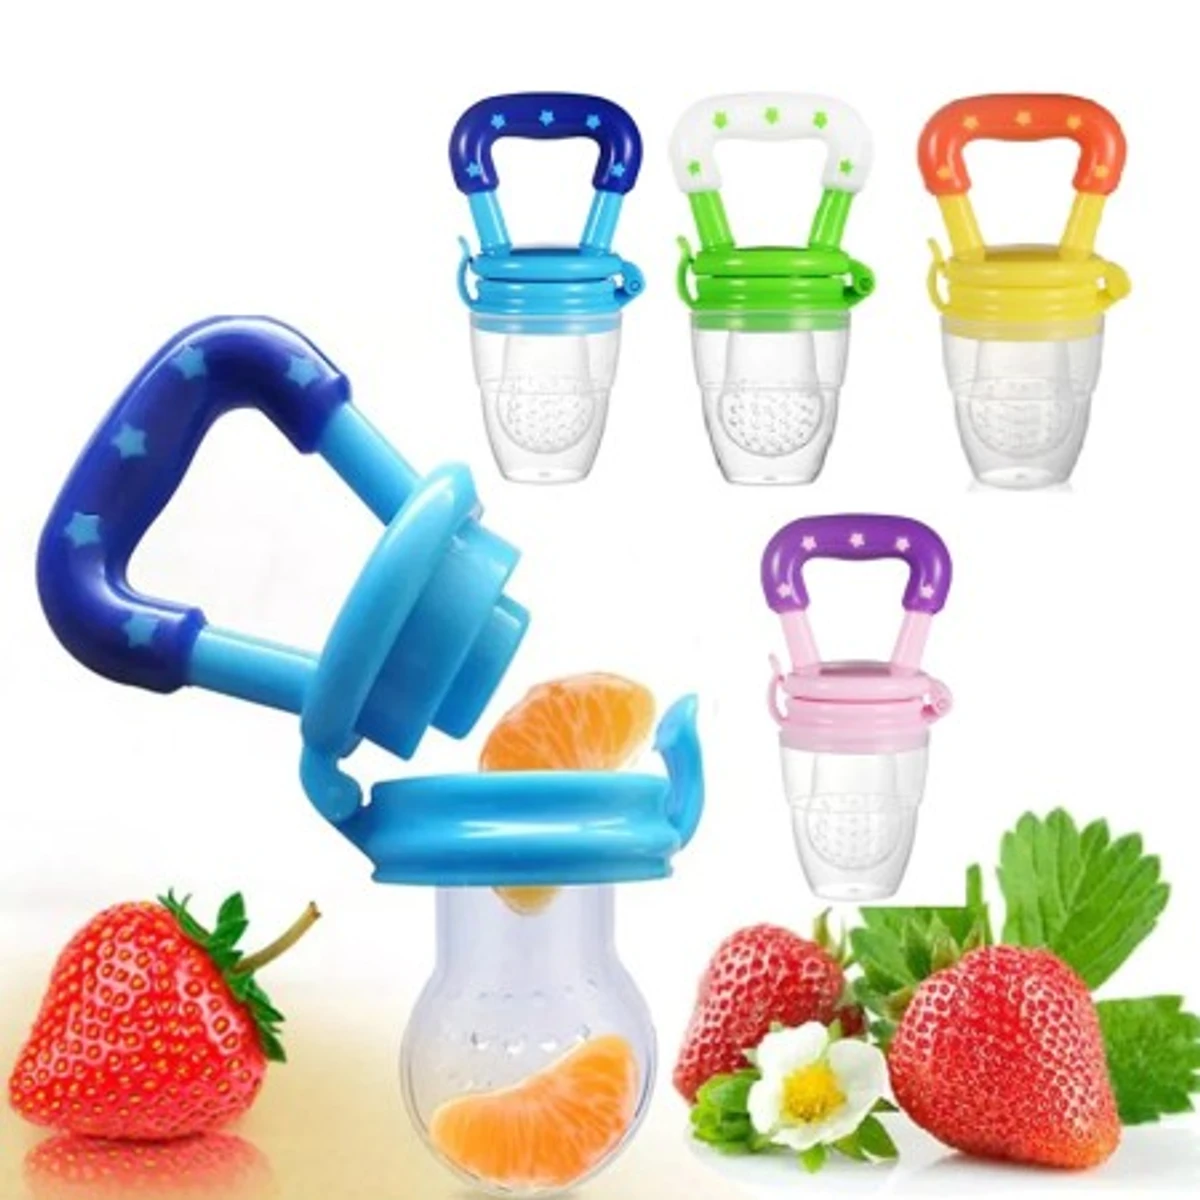 Baby Pacifier Fruit Vegetables Meat Feeder Nibbler Silicone Teething Pacifier Bag Baby Bottle Feeding Toy Nipple Supplies